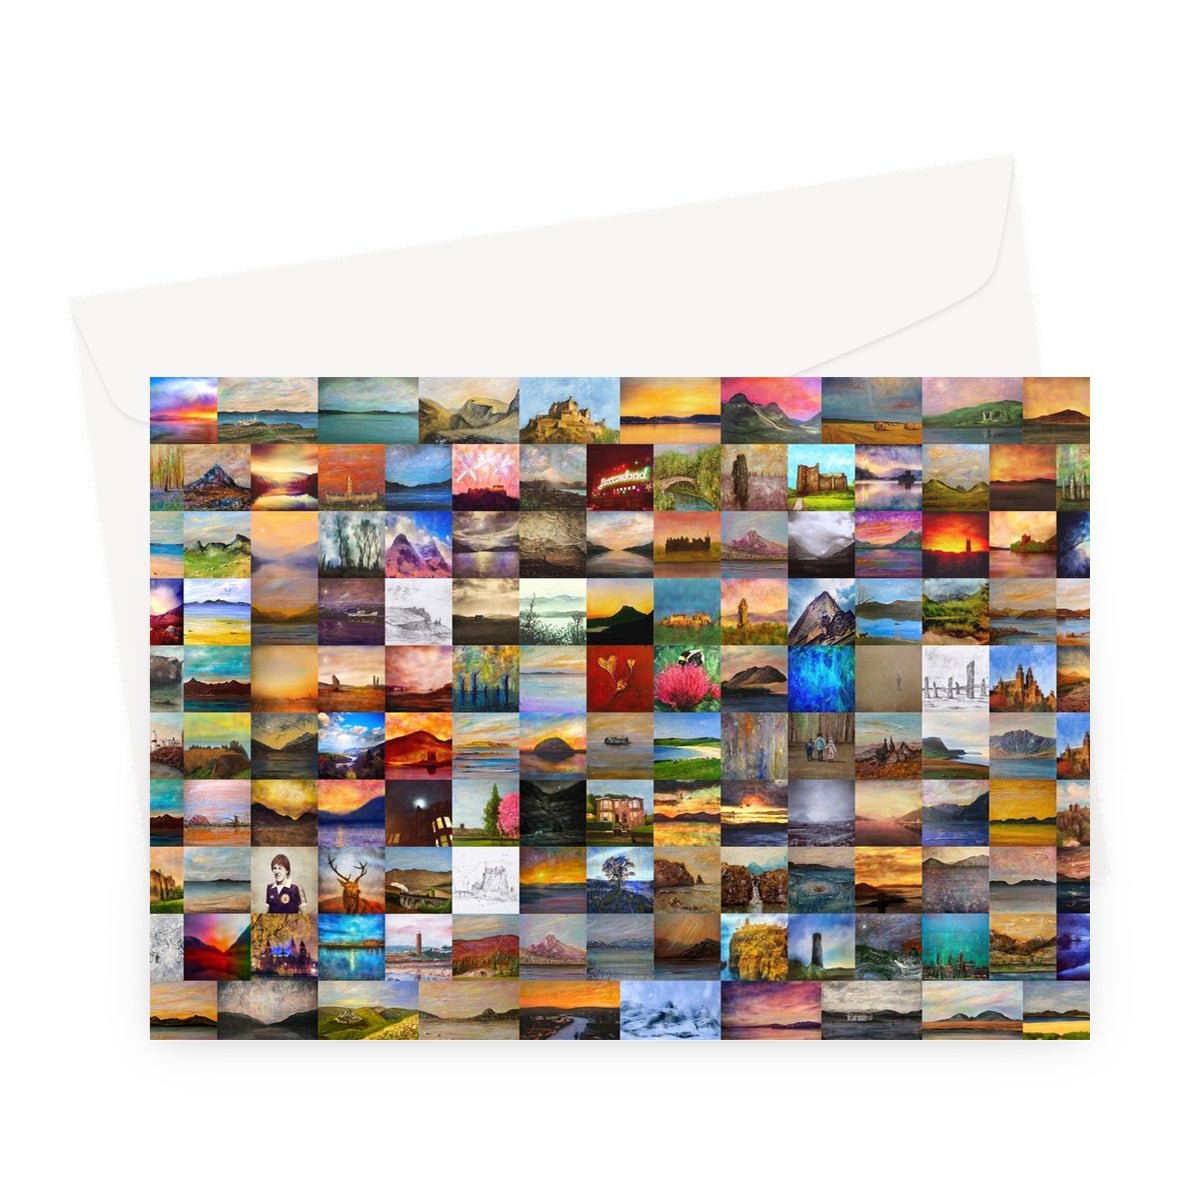 Scottish Artist Hunter Art Collage Greeting Card-Greetings Cards-Scottish Artist Hunter-A5 Landscape-1 Card-Paintings, Prints, Homeware, Art Gifts From Scotland By Scottish Artist Kevin Hunter